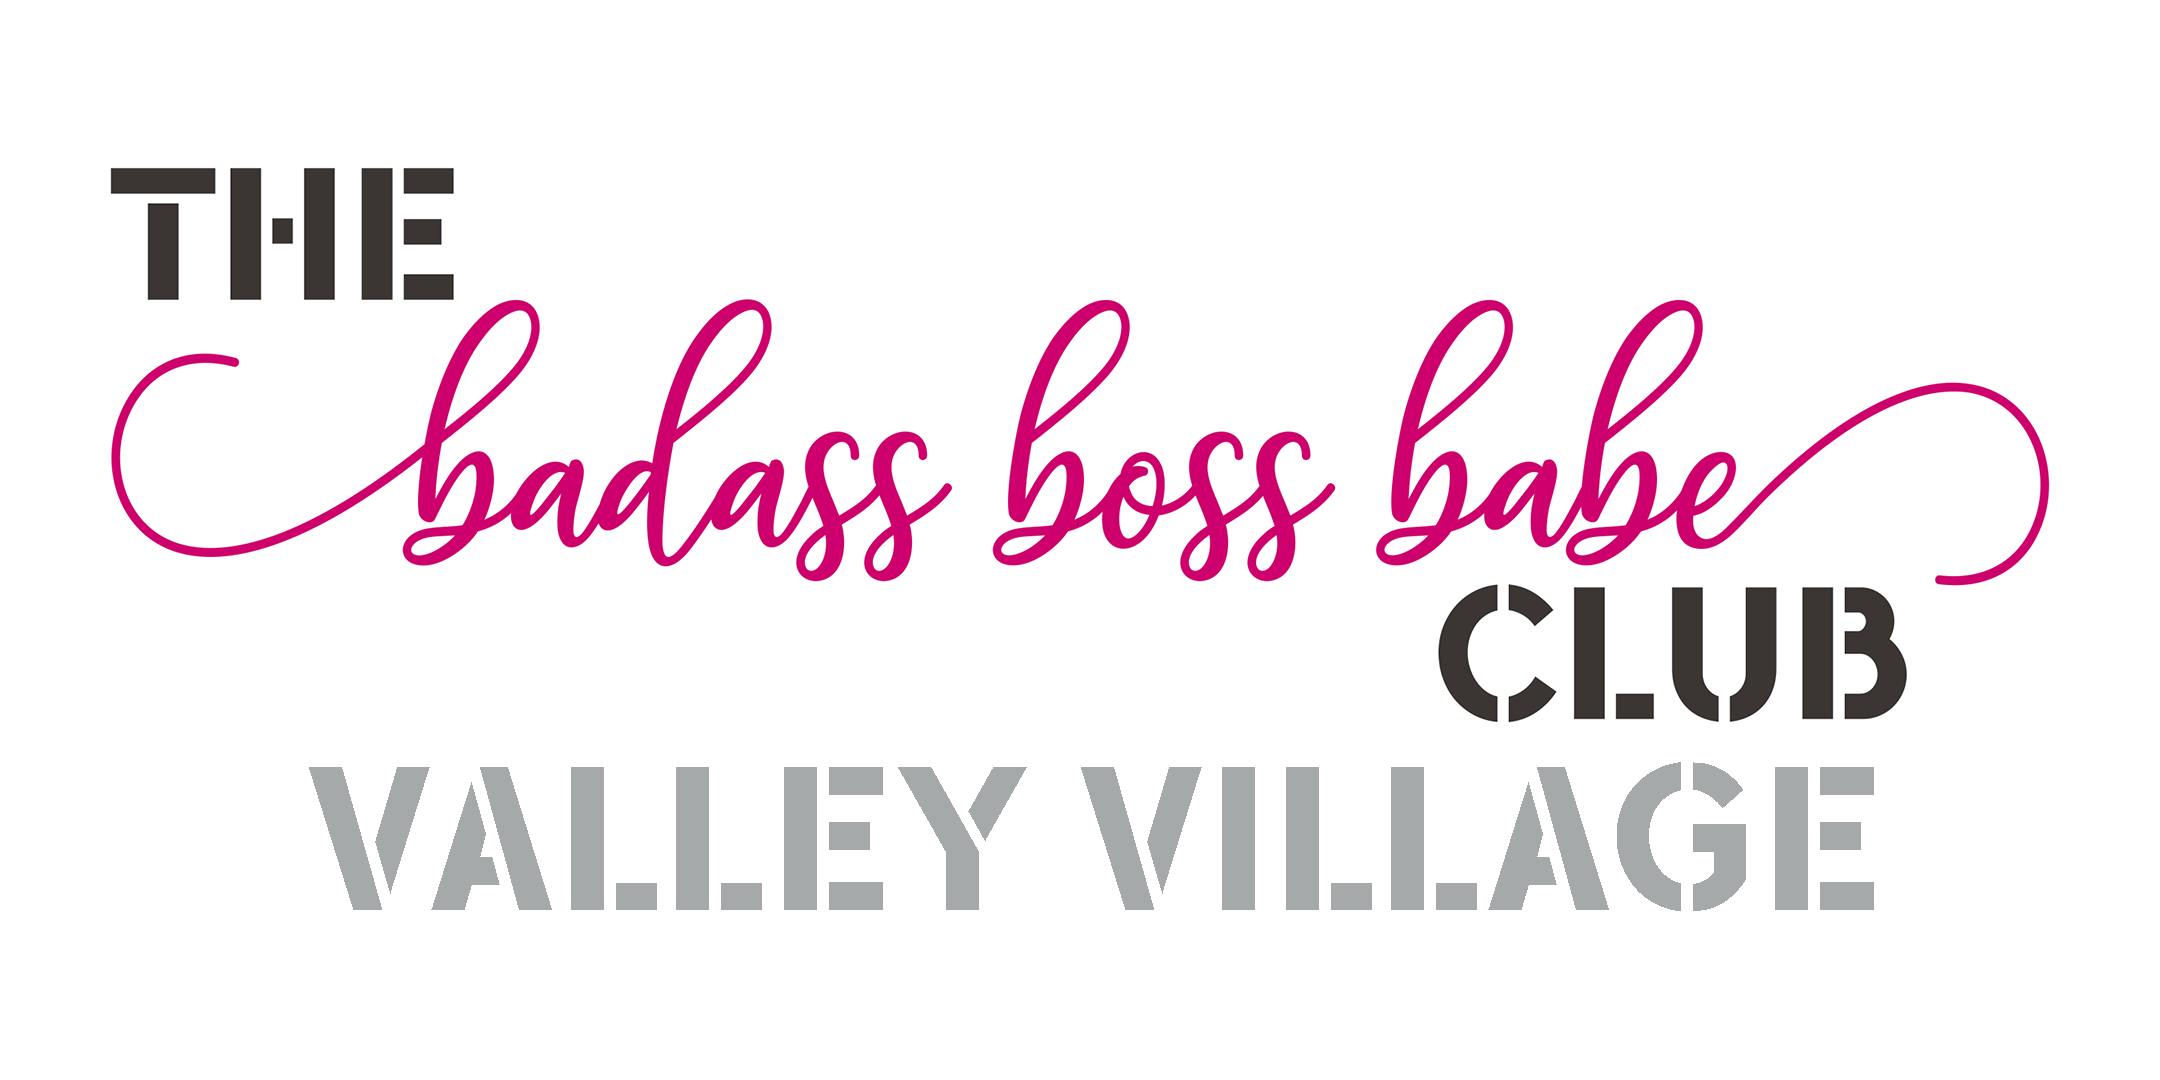 VALLEY VILLAGE Monthly Mixer - July